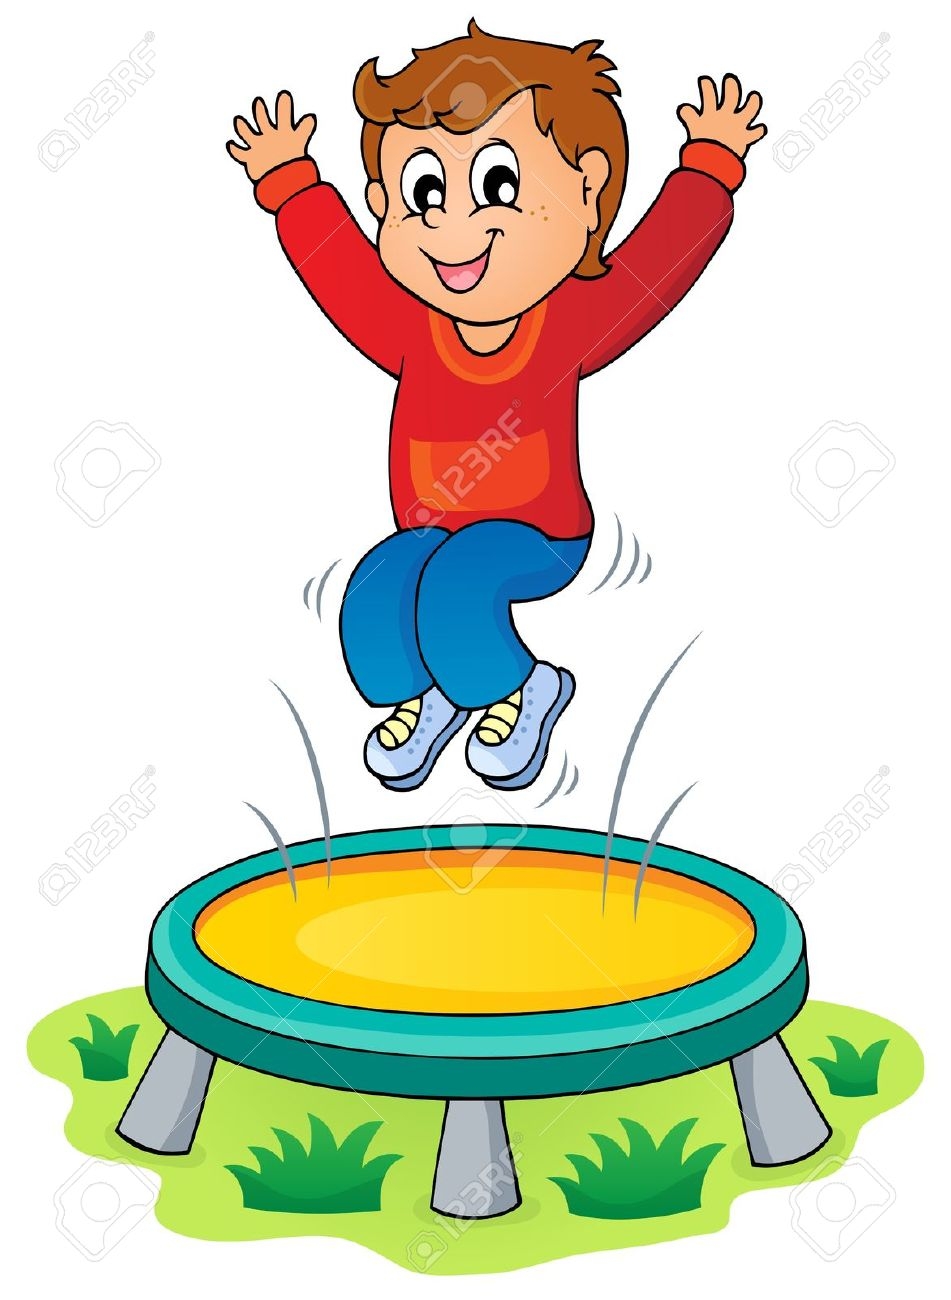 The jump clipart - Clipground